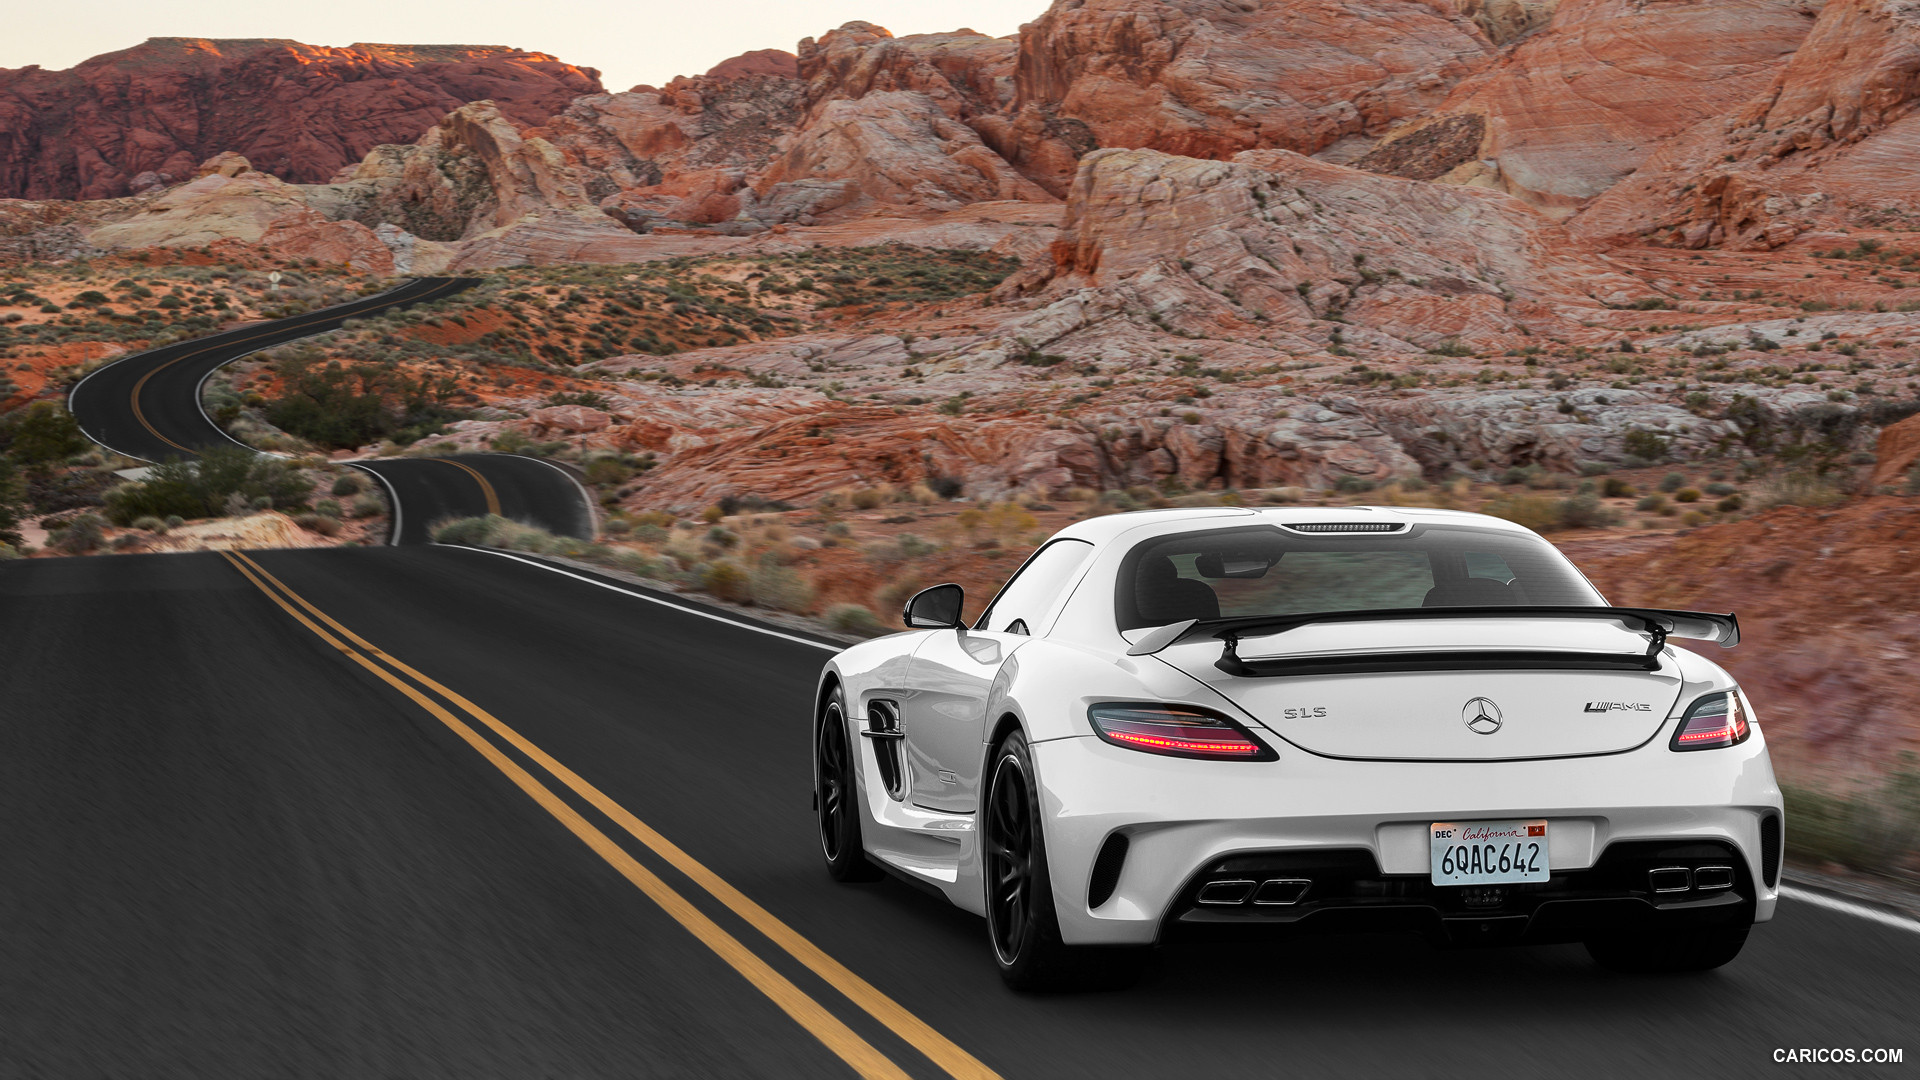 2014 Mercedes-Benz SLS AMG Coupe Black Series White - Rear, #4 of 40